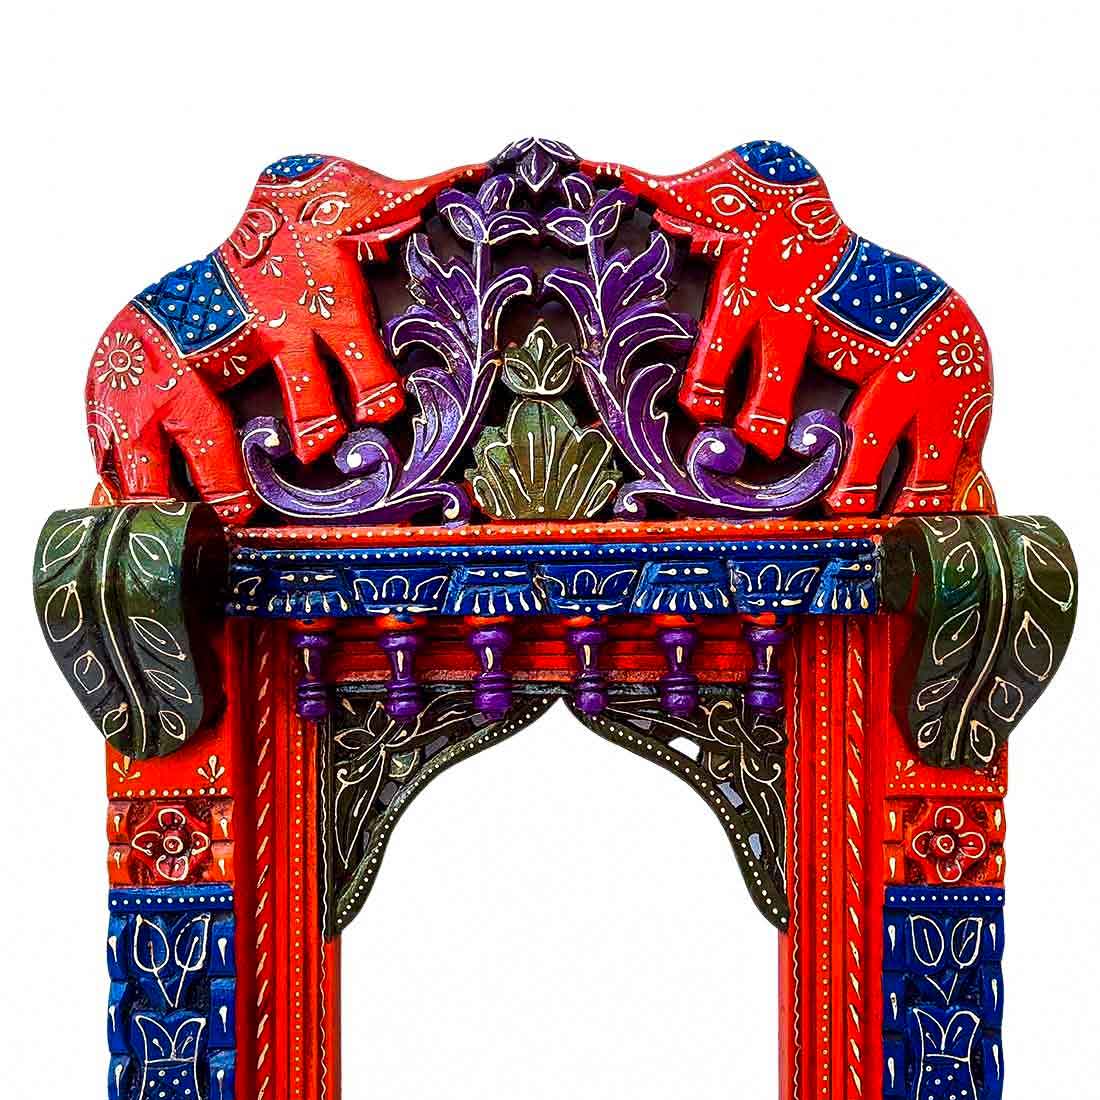 Elephant Design Jharokha -  Wall Decor - For Home Decor & Gifts -  27 Inches - ApkaMart